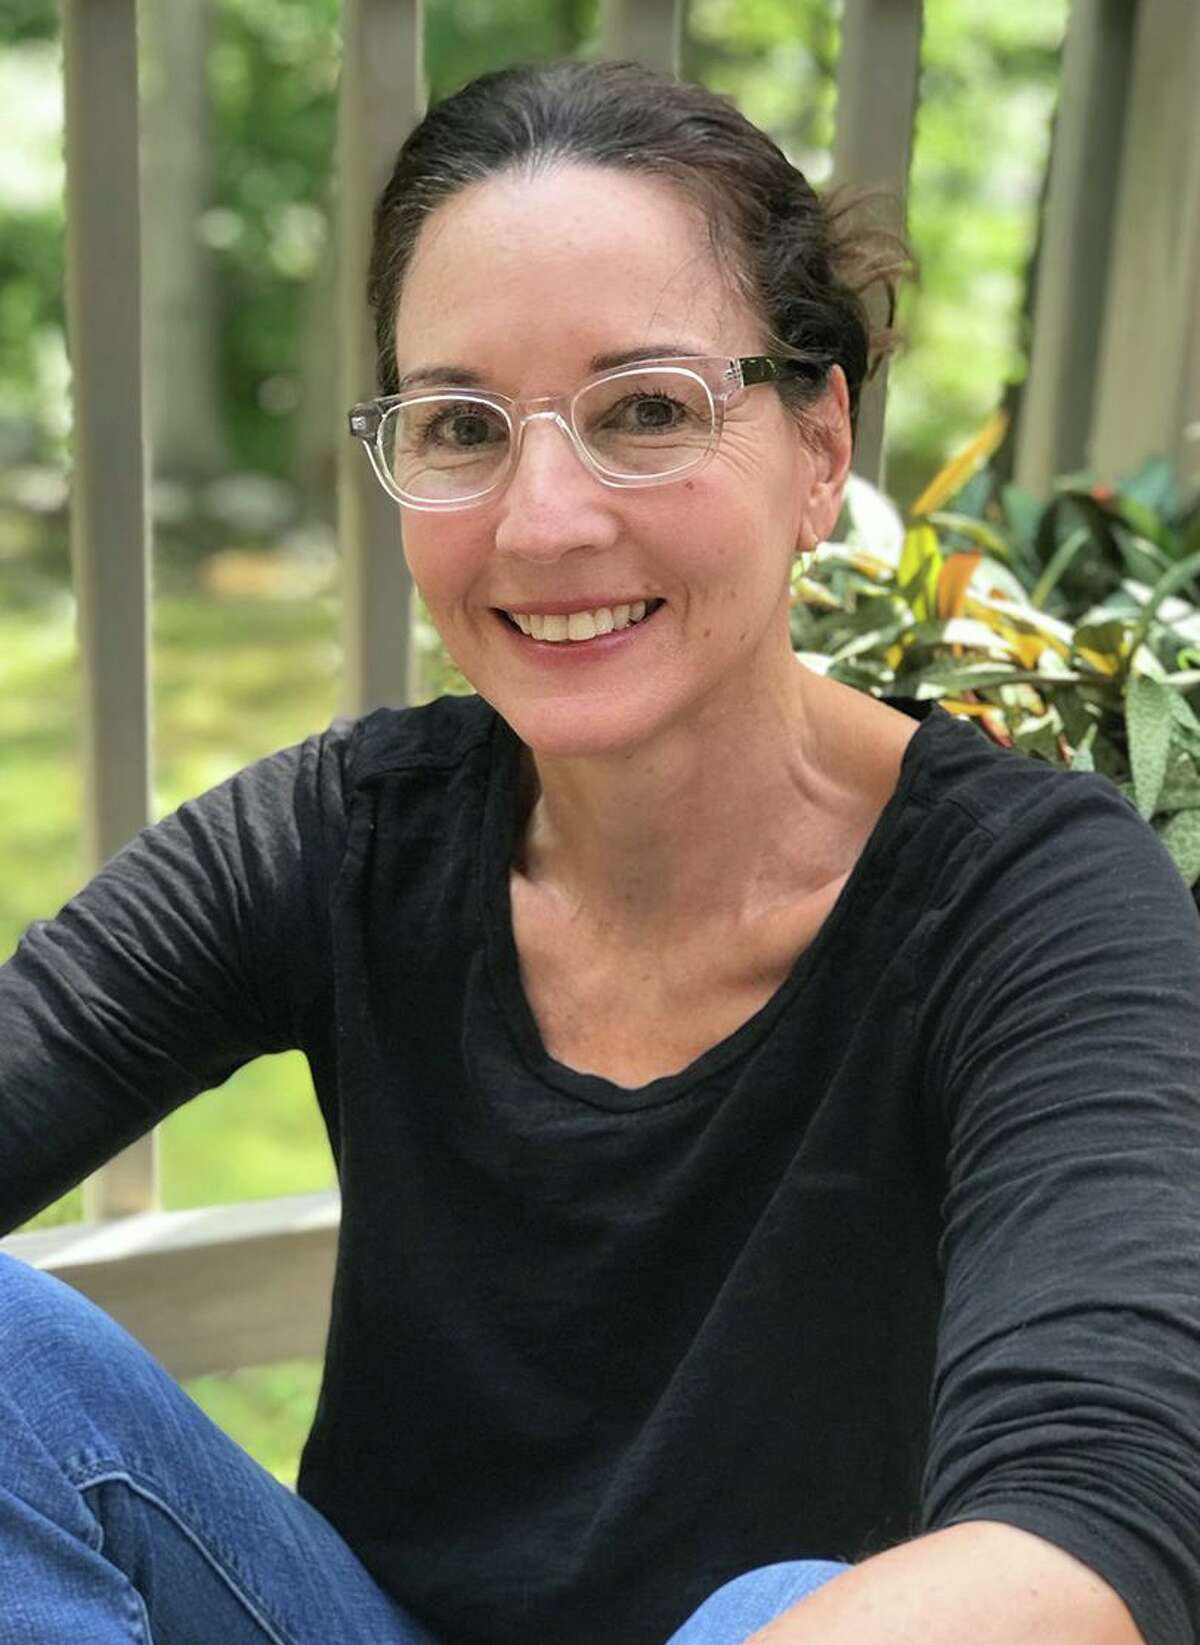 Nora Baskin of Weston will speak Sept. 10, 2021 at the Westport Library about her middle grade novel "Nine, Ten: A September 11 Story." She also has some guidance on how parents can talk to children about that event.